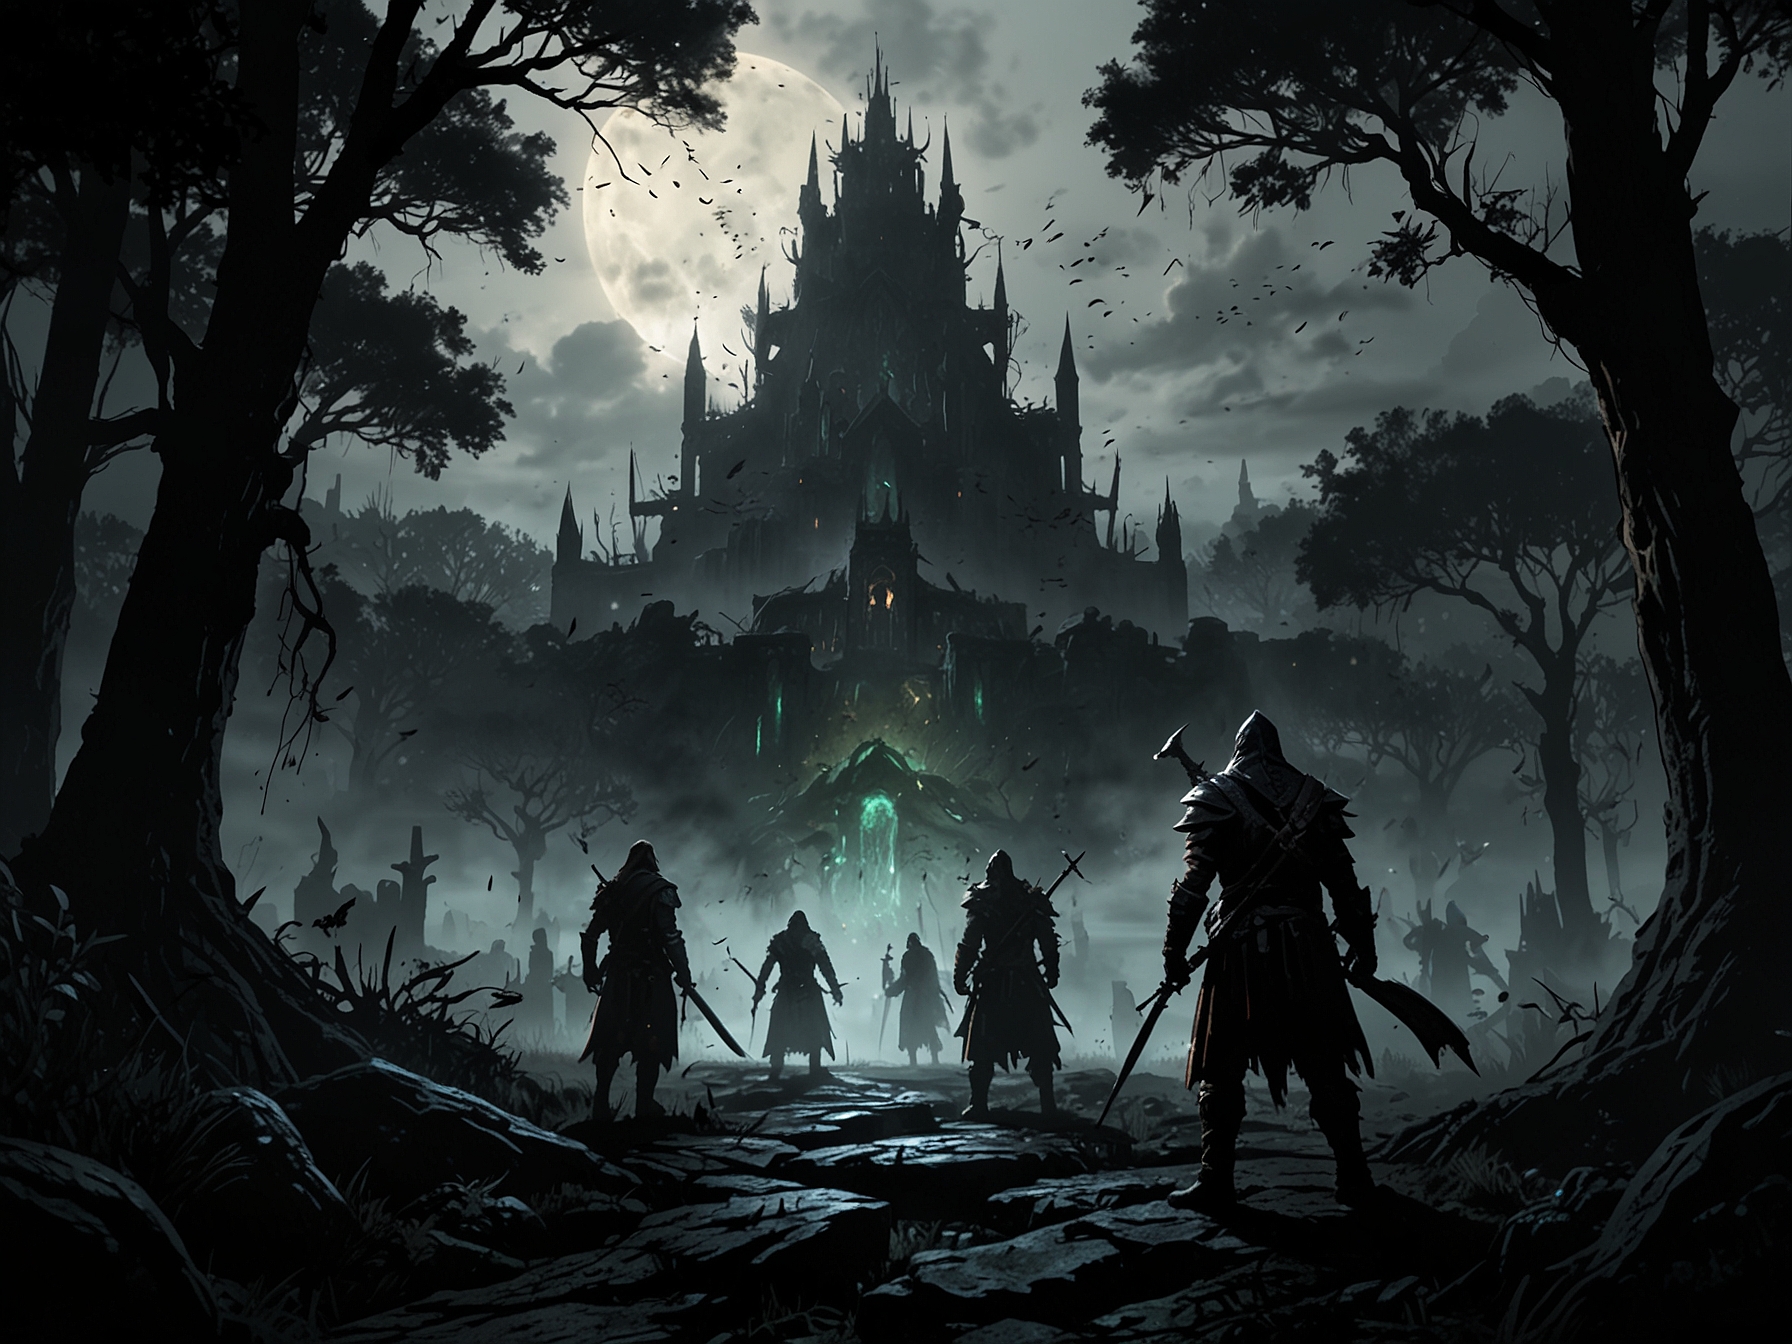 Illustration of Elden Ring multiplayer gameplay showcasing players exploring the new expansion, Shadow of the Erdtree, together before the Seamless Co-op mod malfunctioned.